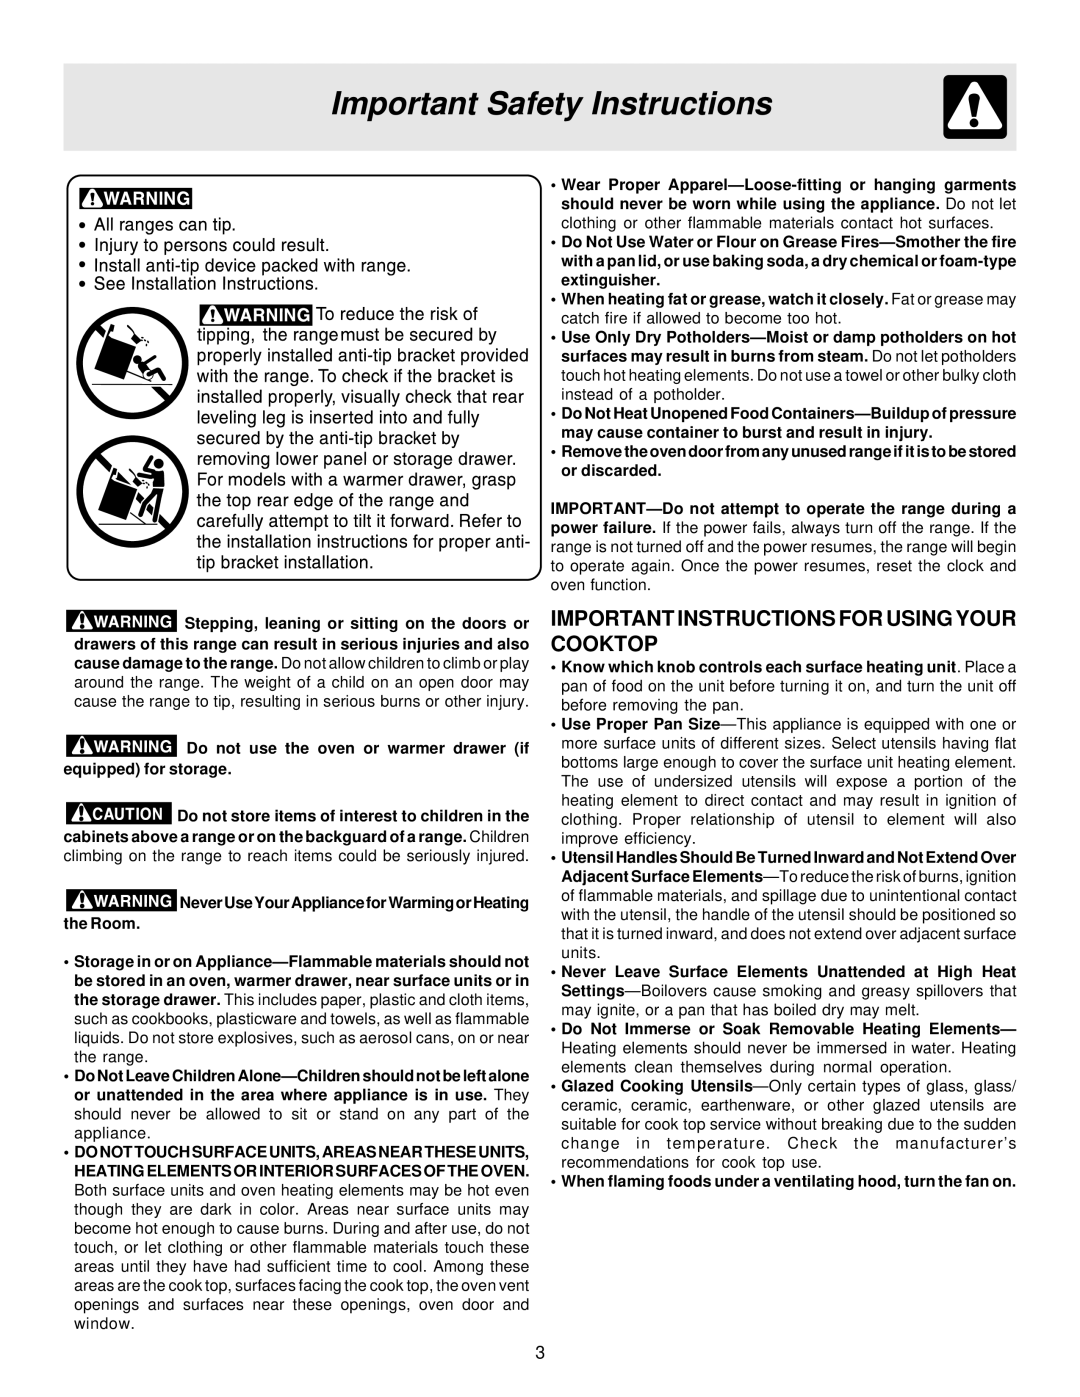 Frigidaire ES100 important safety instructions Important Instructions For Using Your Cooktop, Important Safety Instructions 